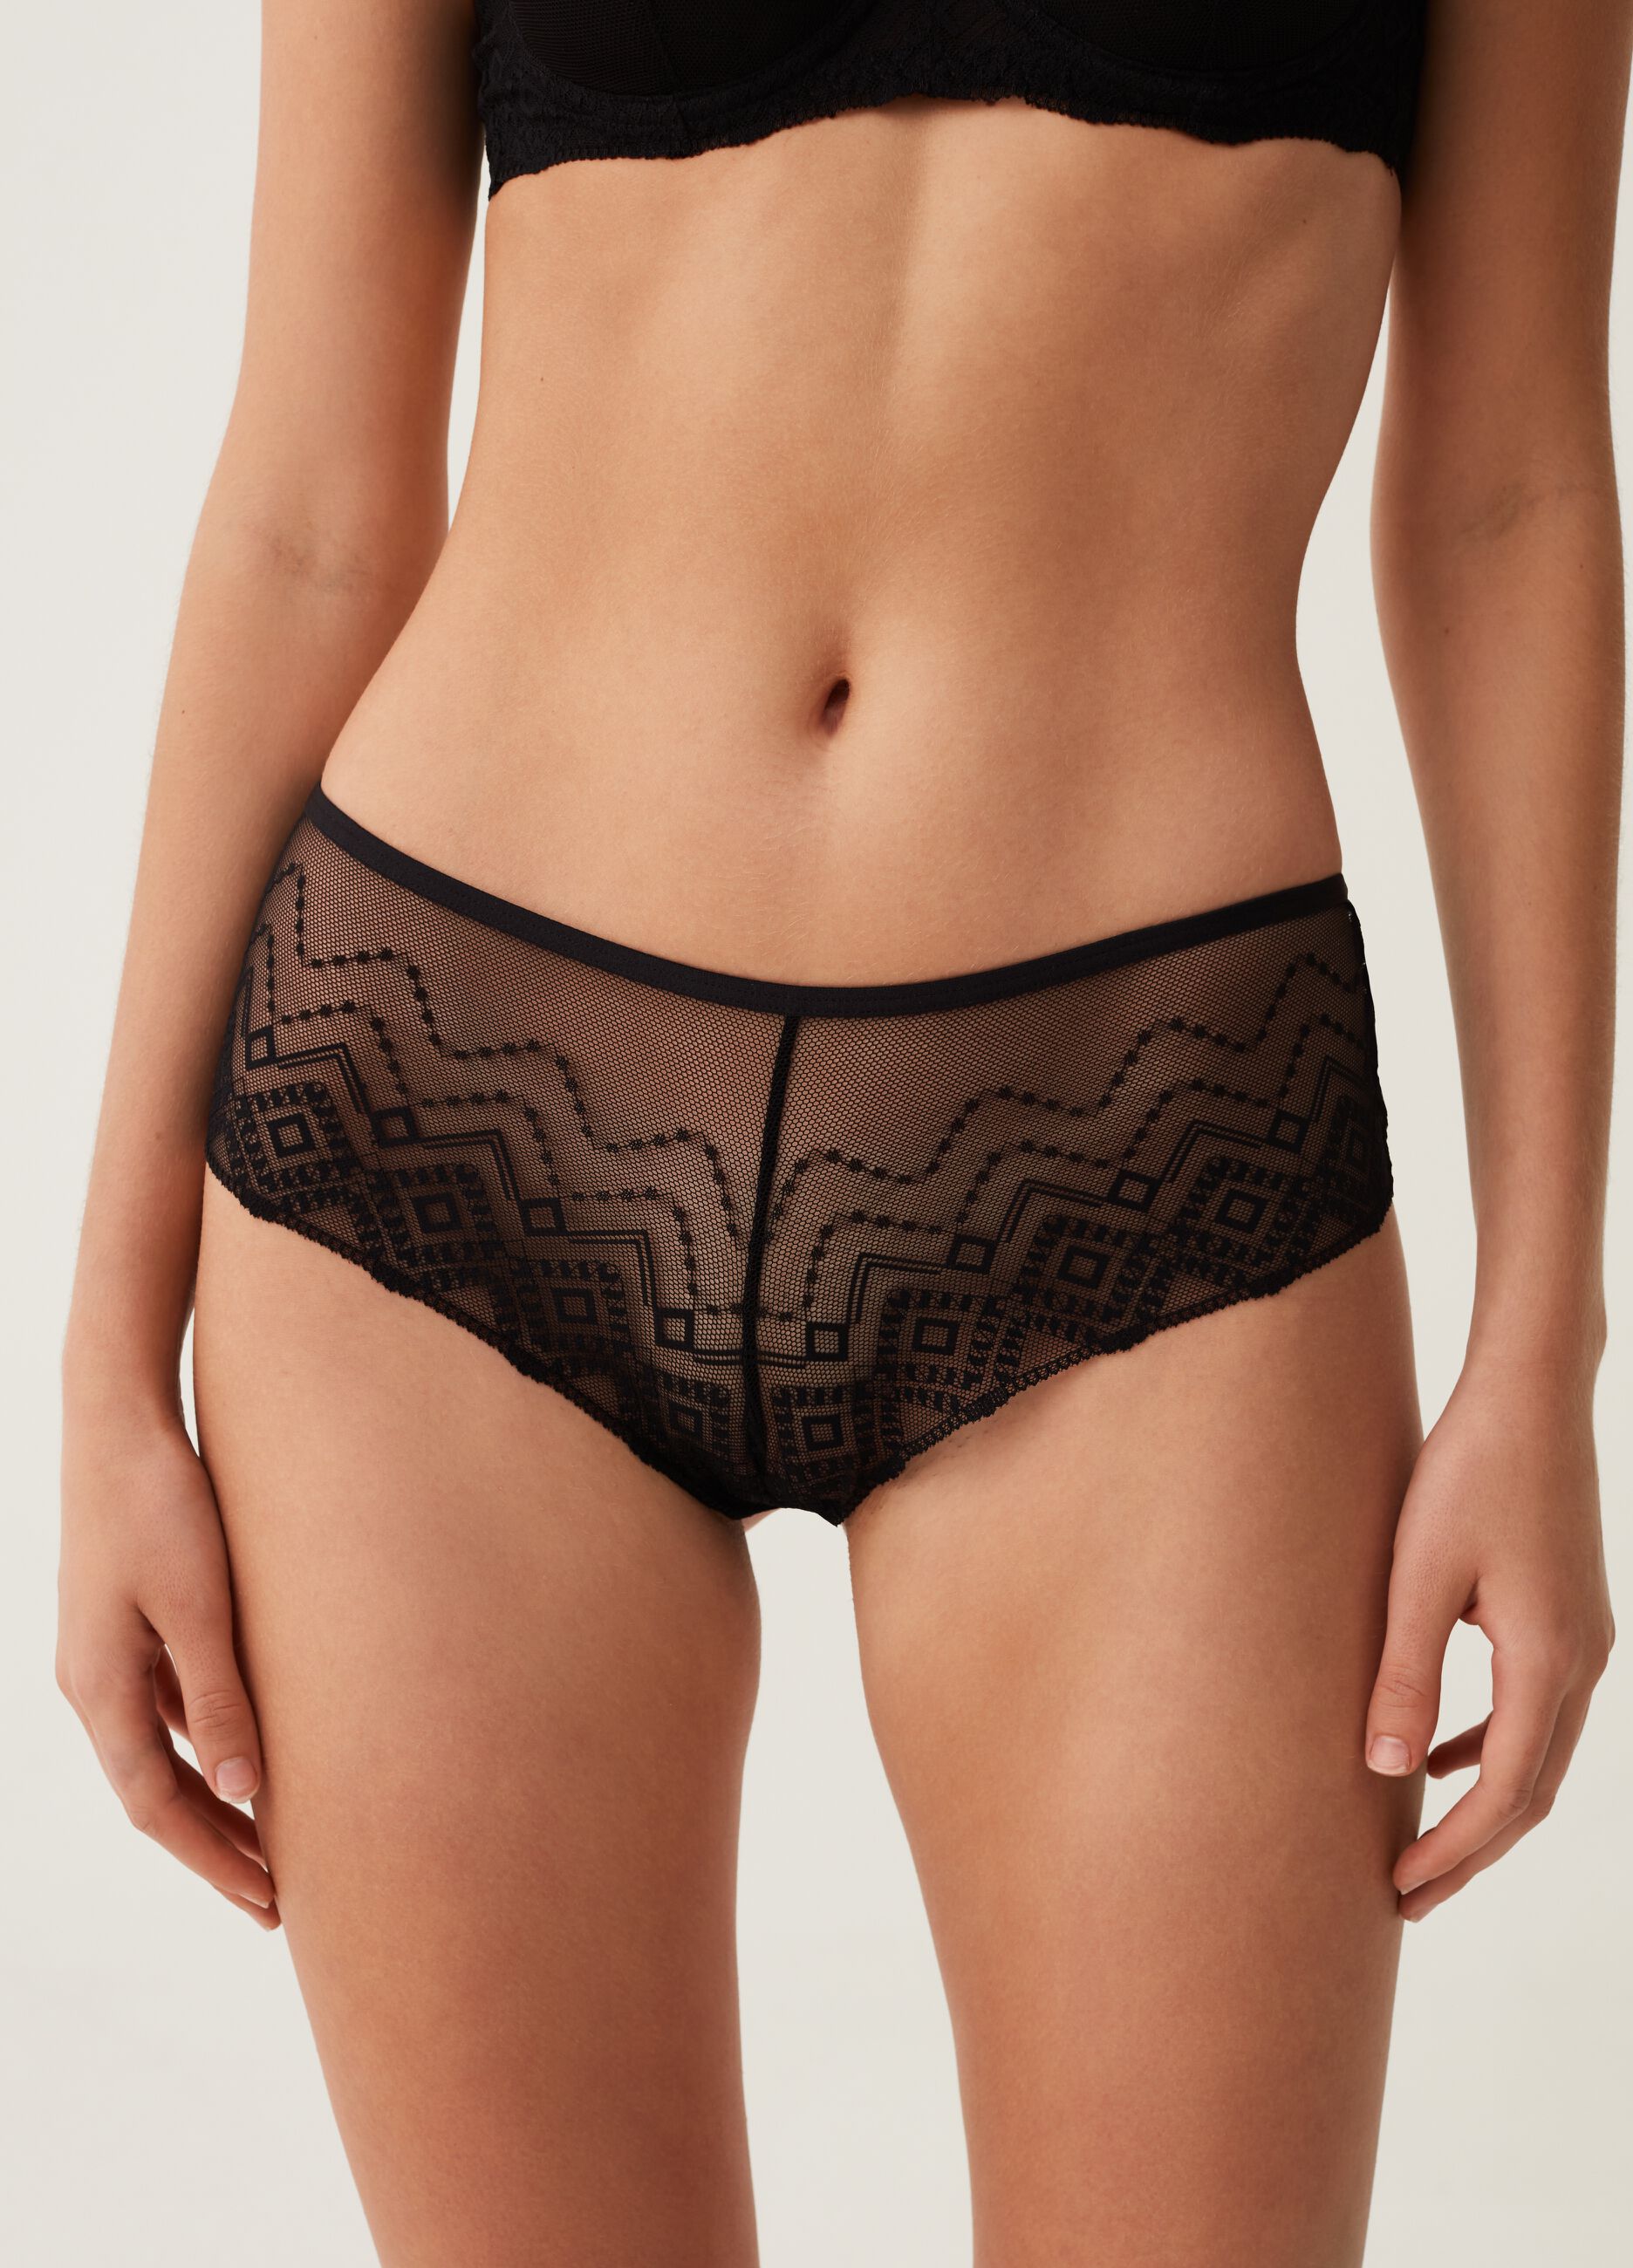 Retro French Lace Trim Knickers – Girl Intuitive